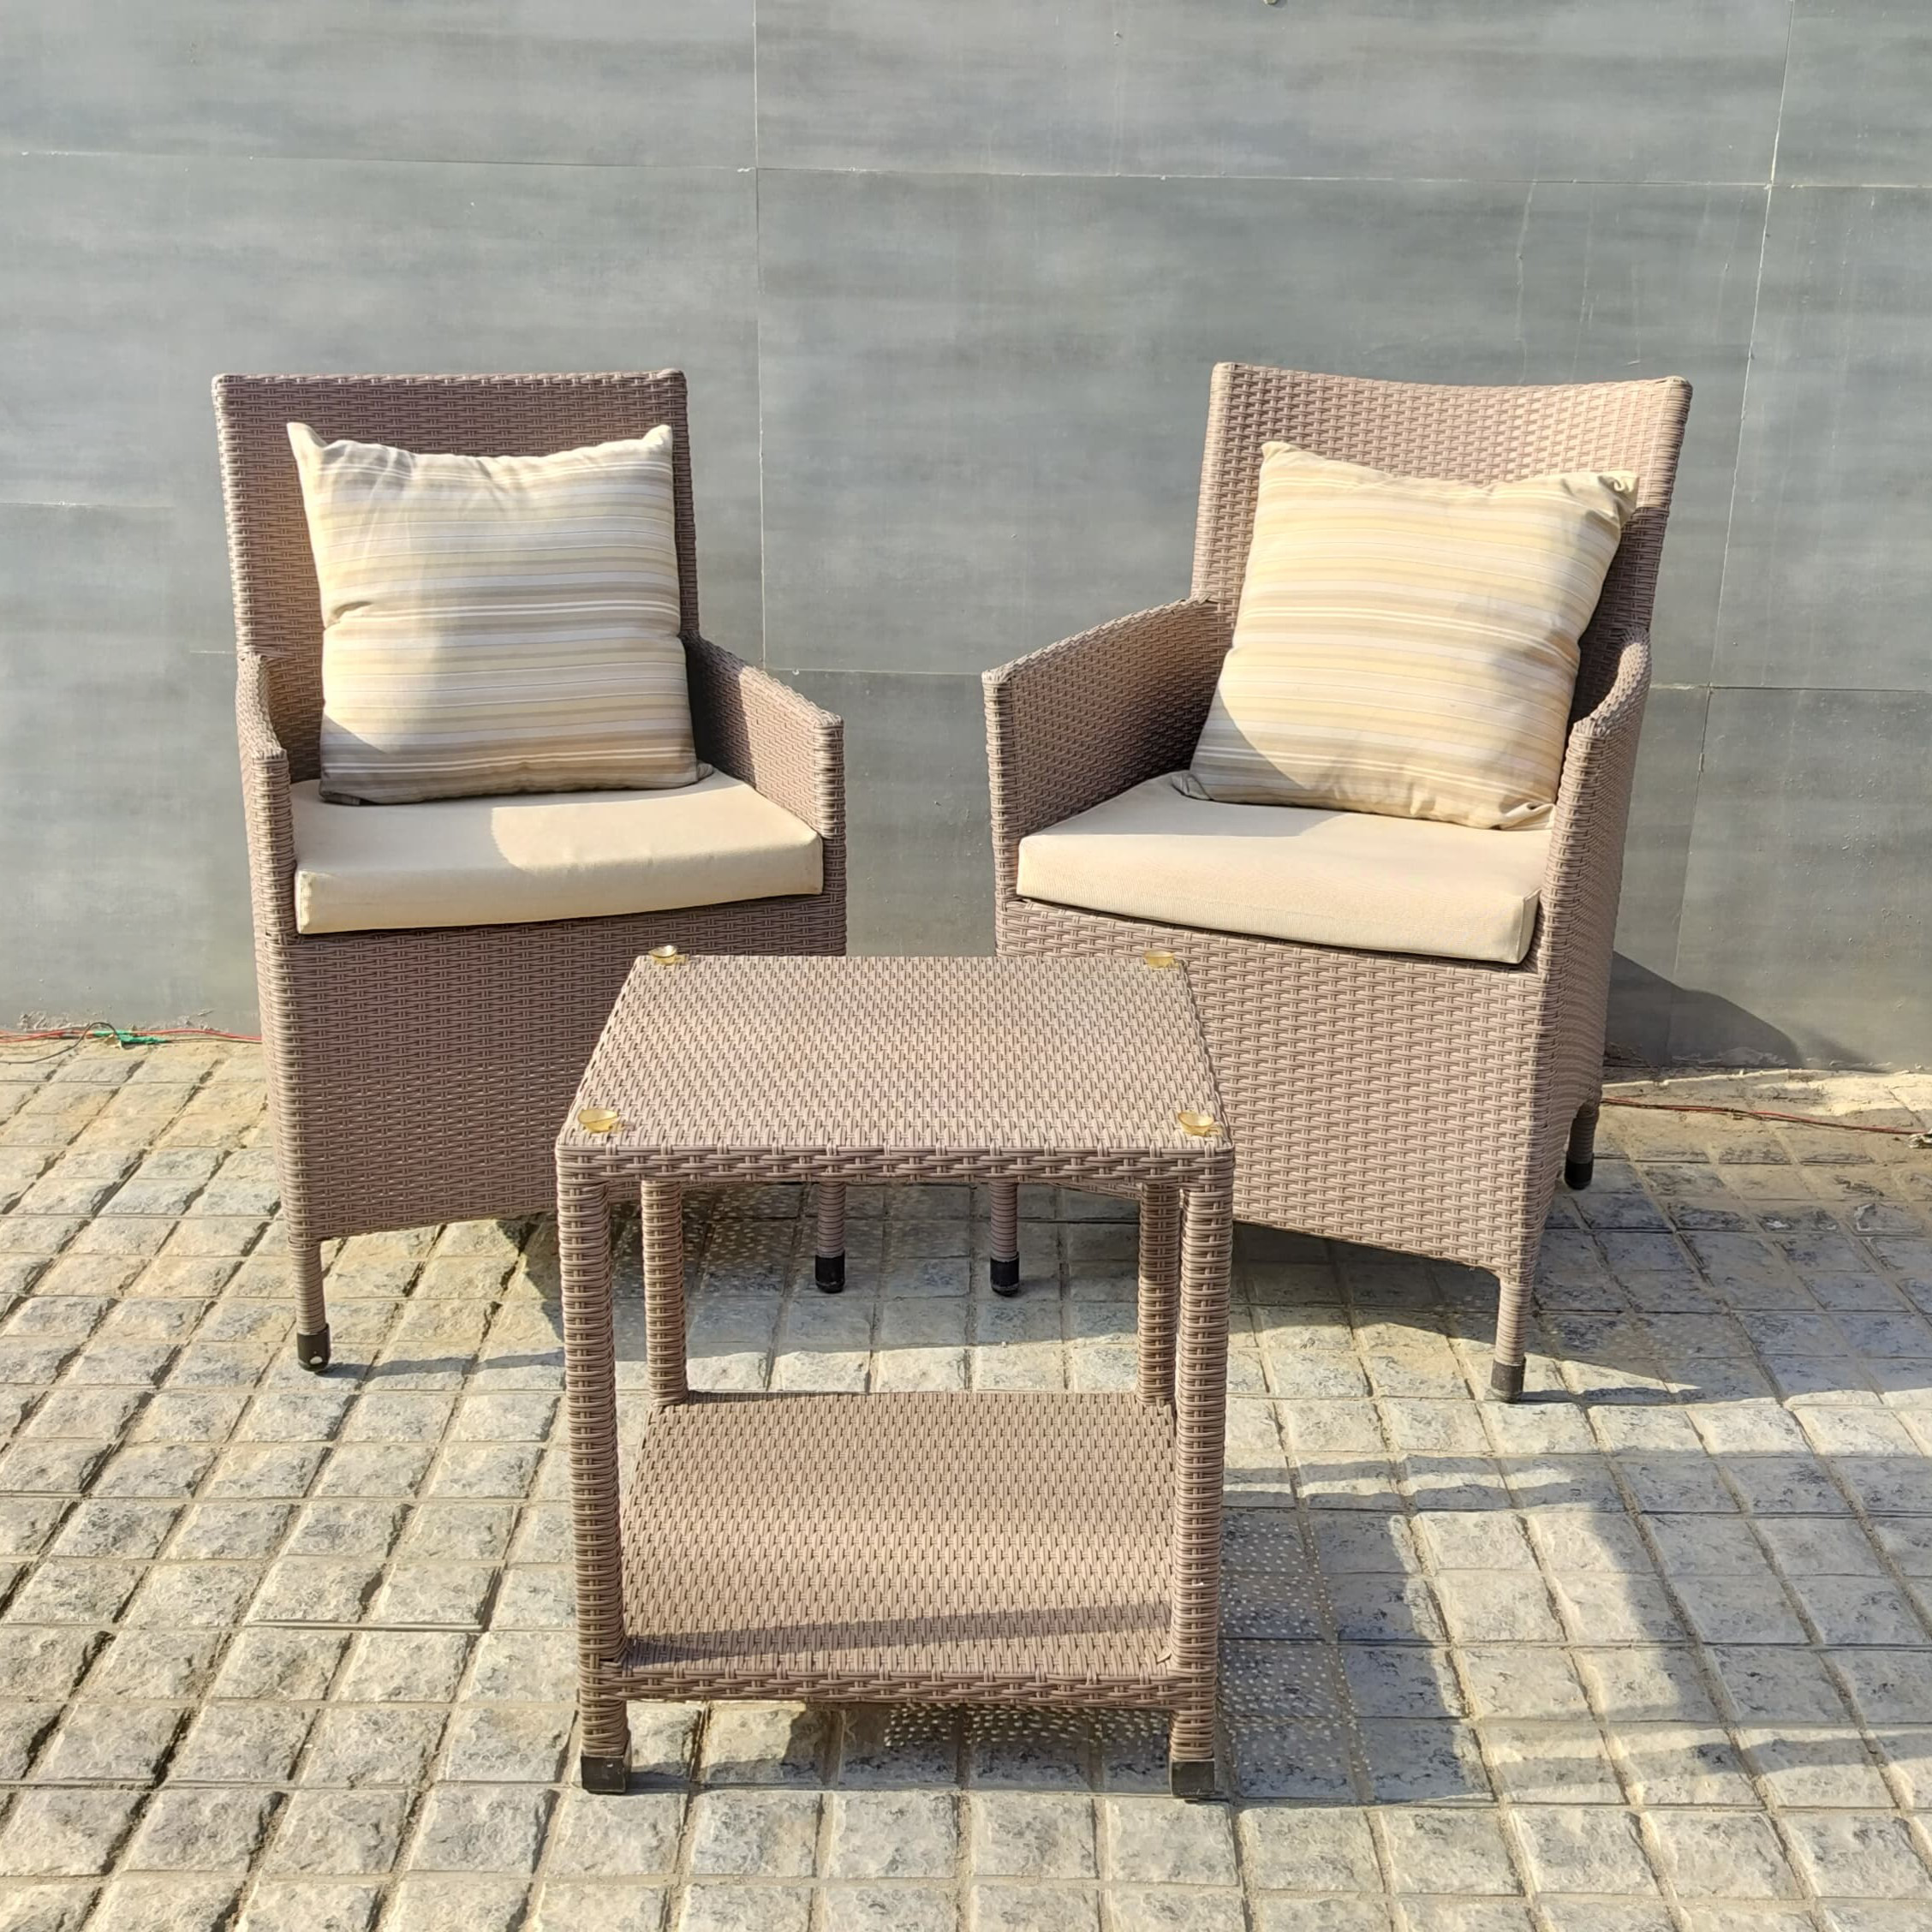 ASYMETRICAL CHAIRS SET